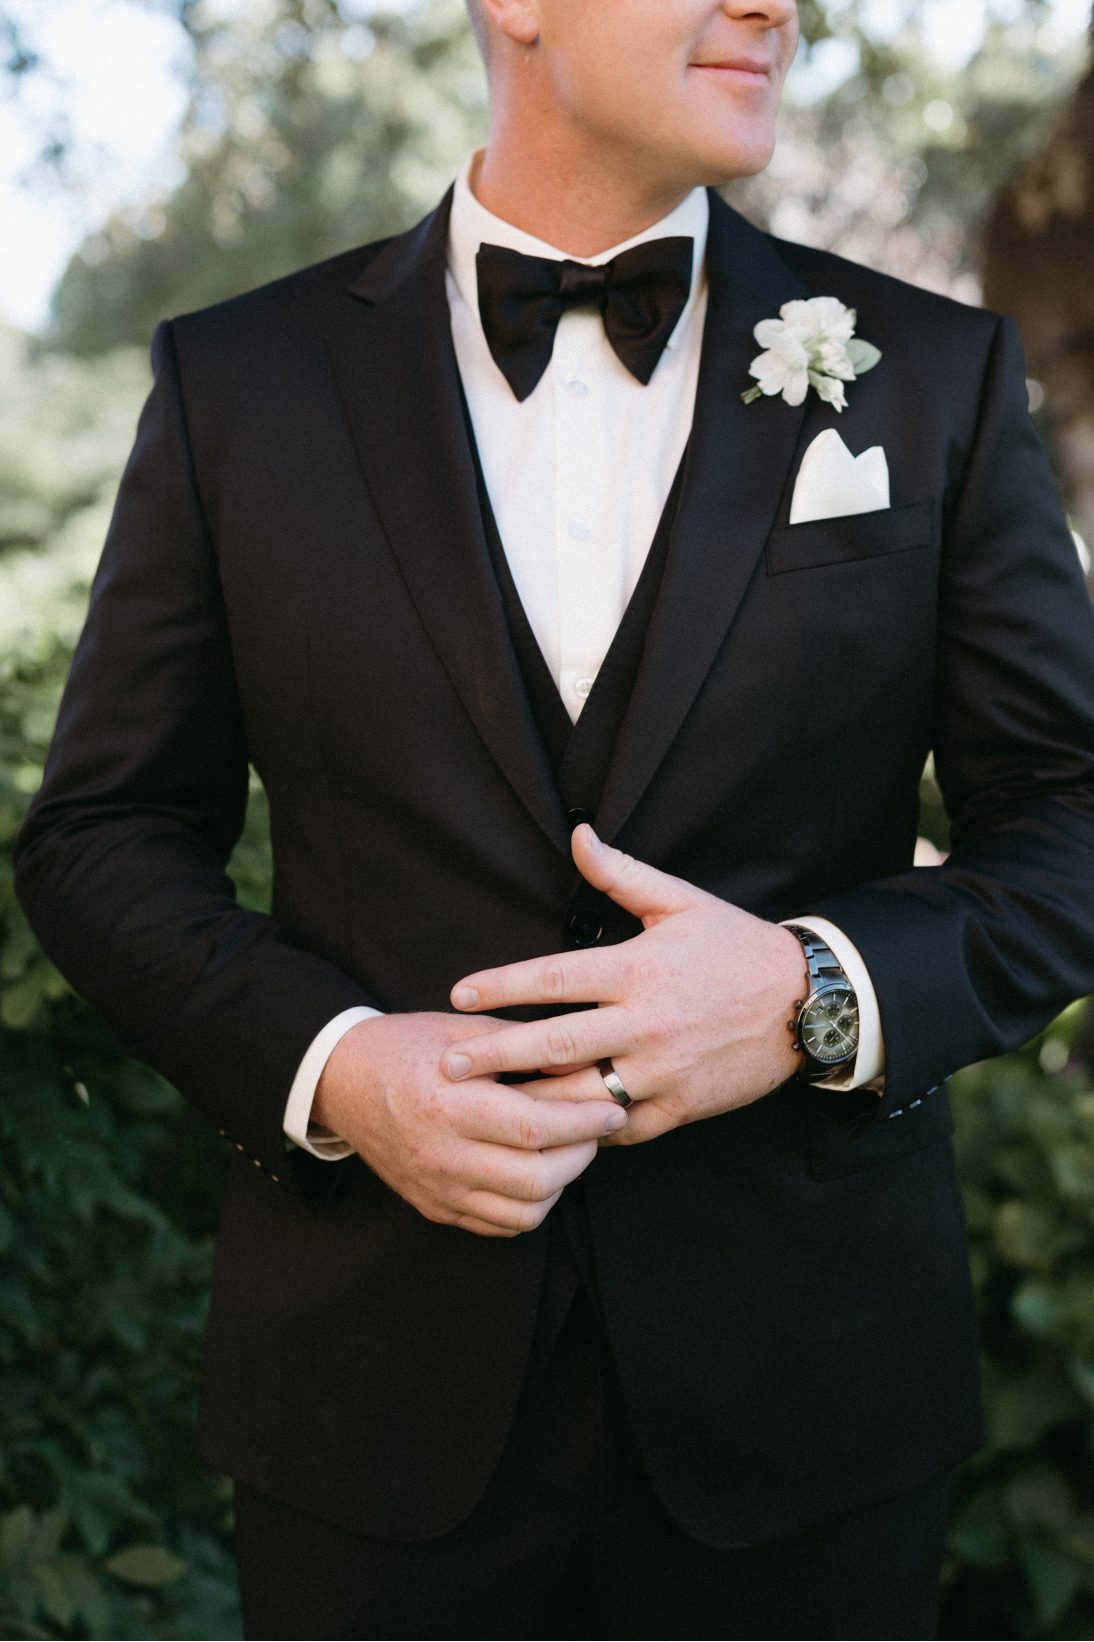 A snapshot of Tanner's wedding attire, a crisp black tux and classic white boutonniere.